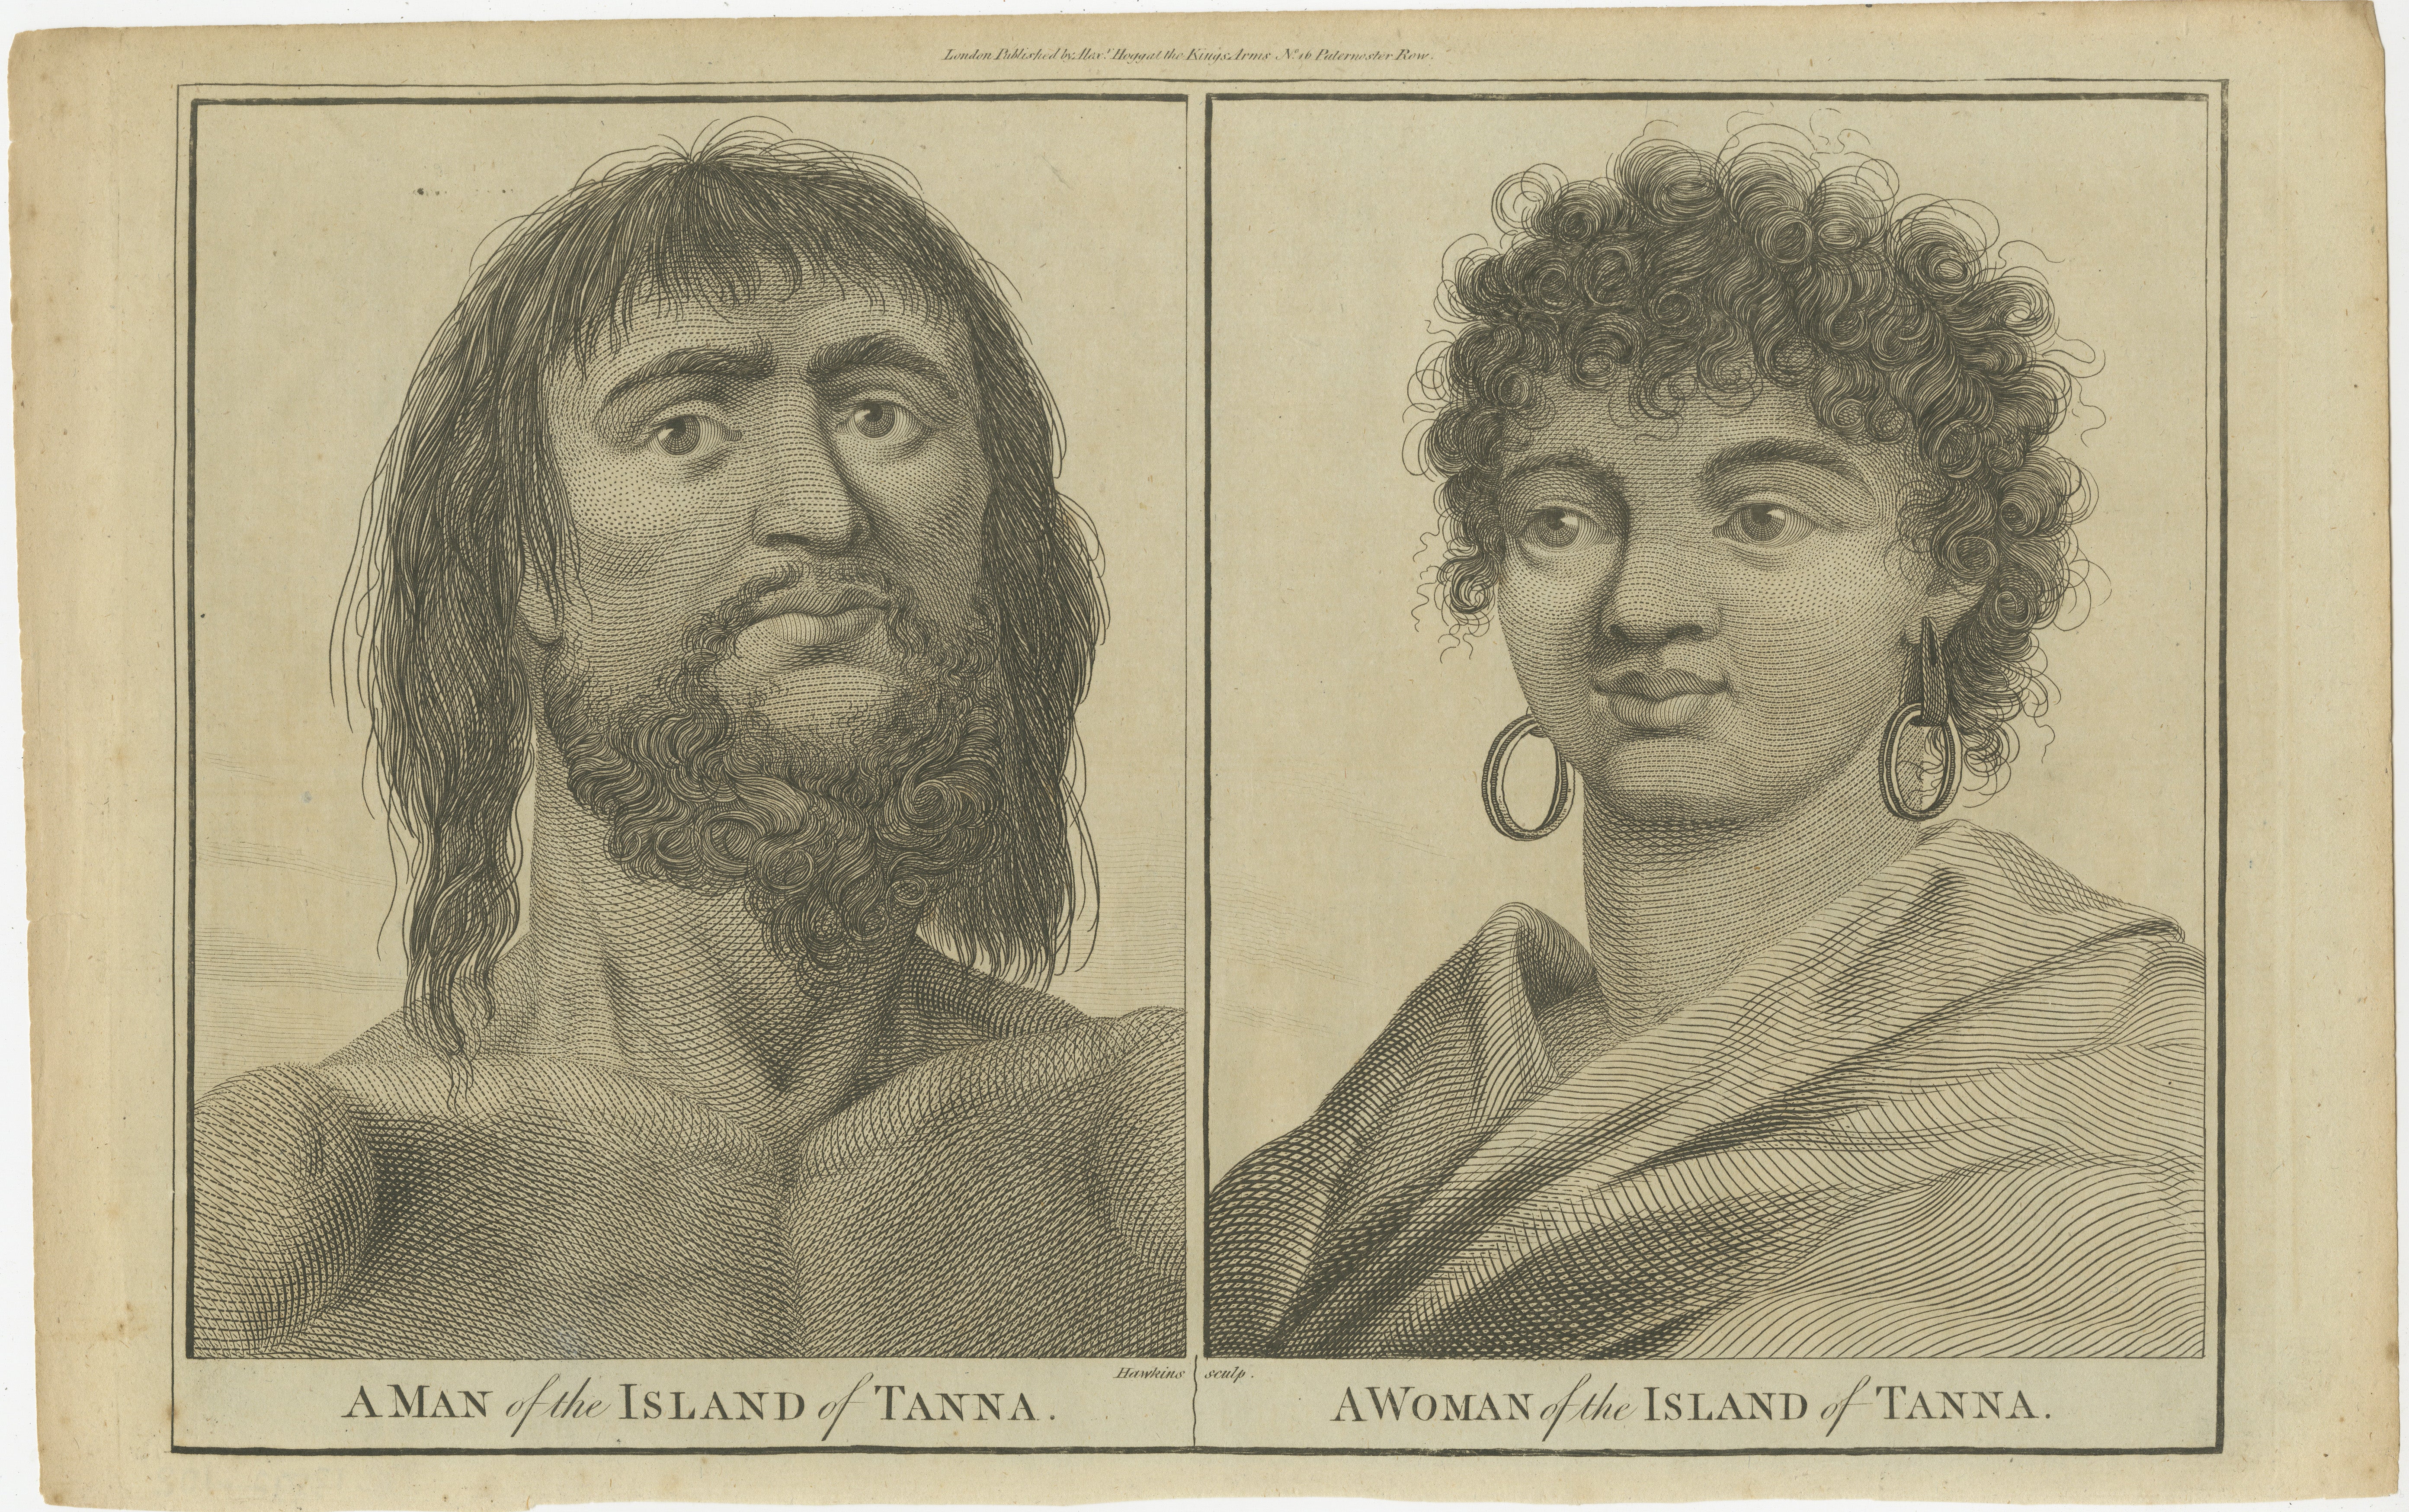 The engraving features two individual portraits side by side, labeled as inhabitants of the island of Tanna, which is part of Vanuatu in the South Pacific.

On the left is 